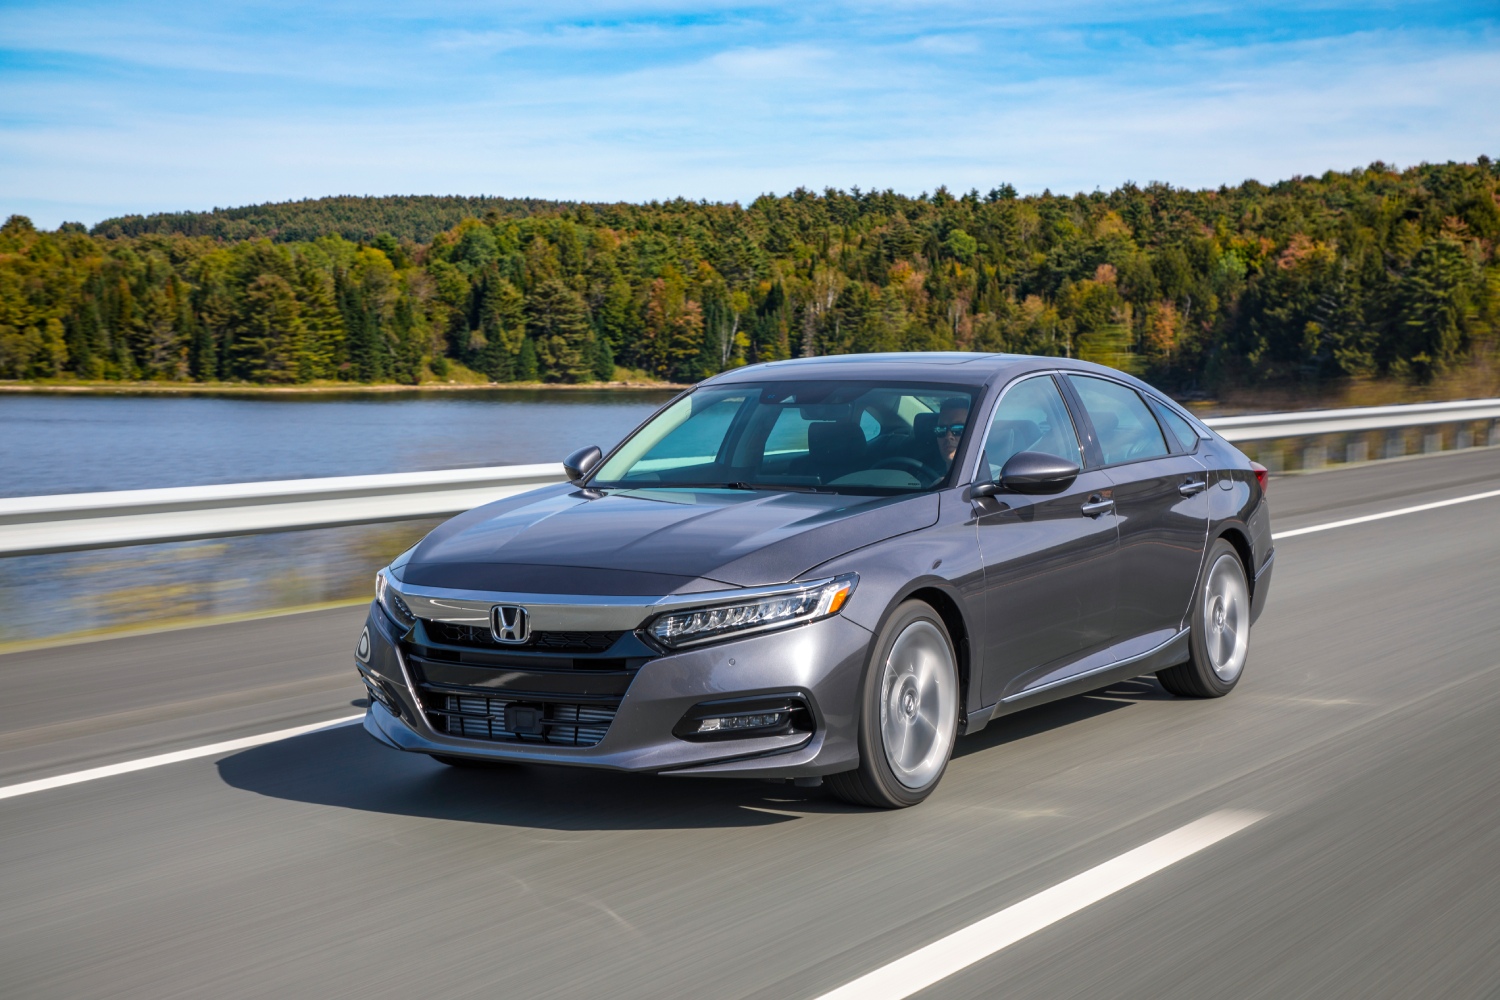 The best used Honda Accord years to search for include this 2020 version